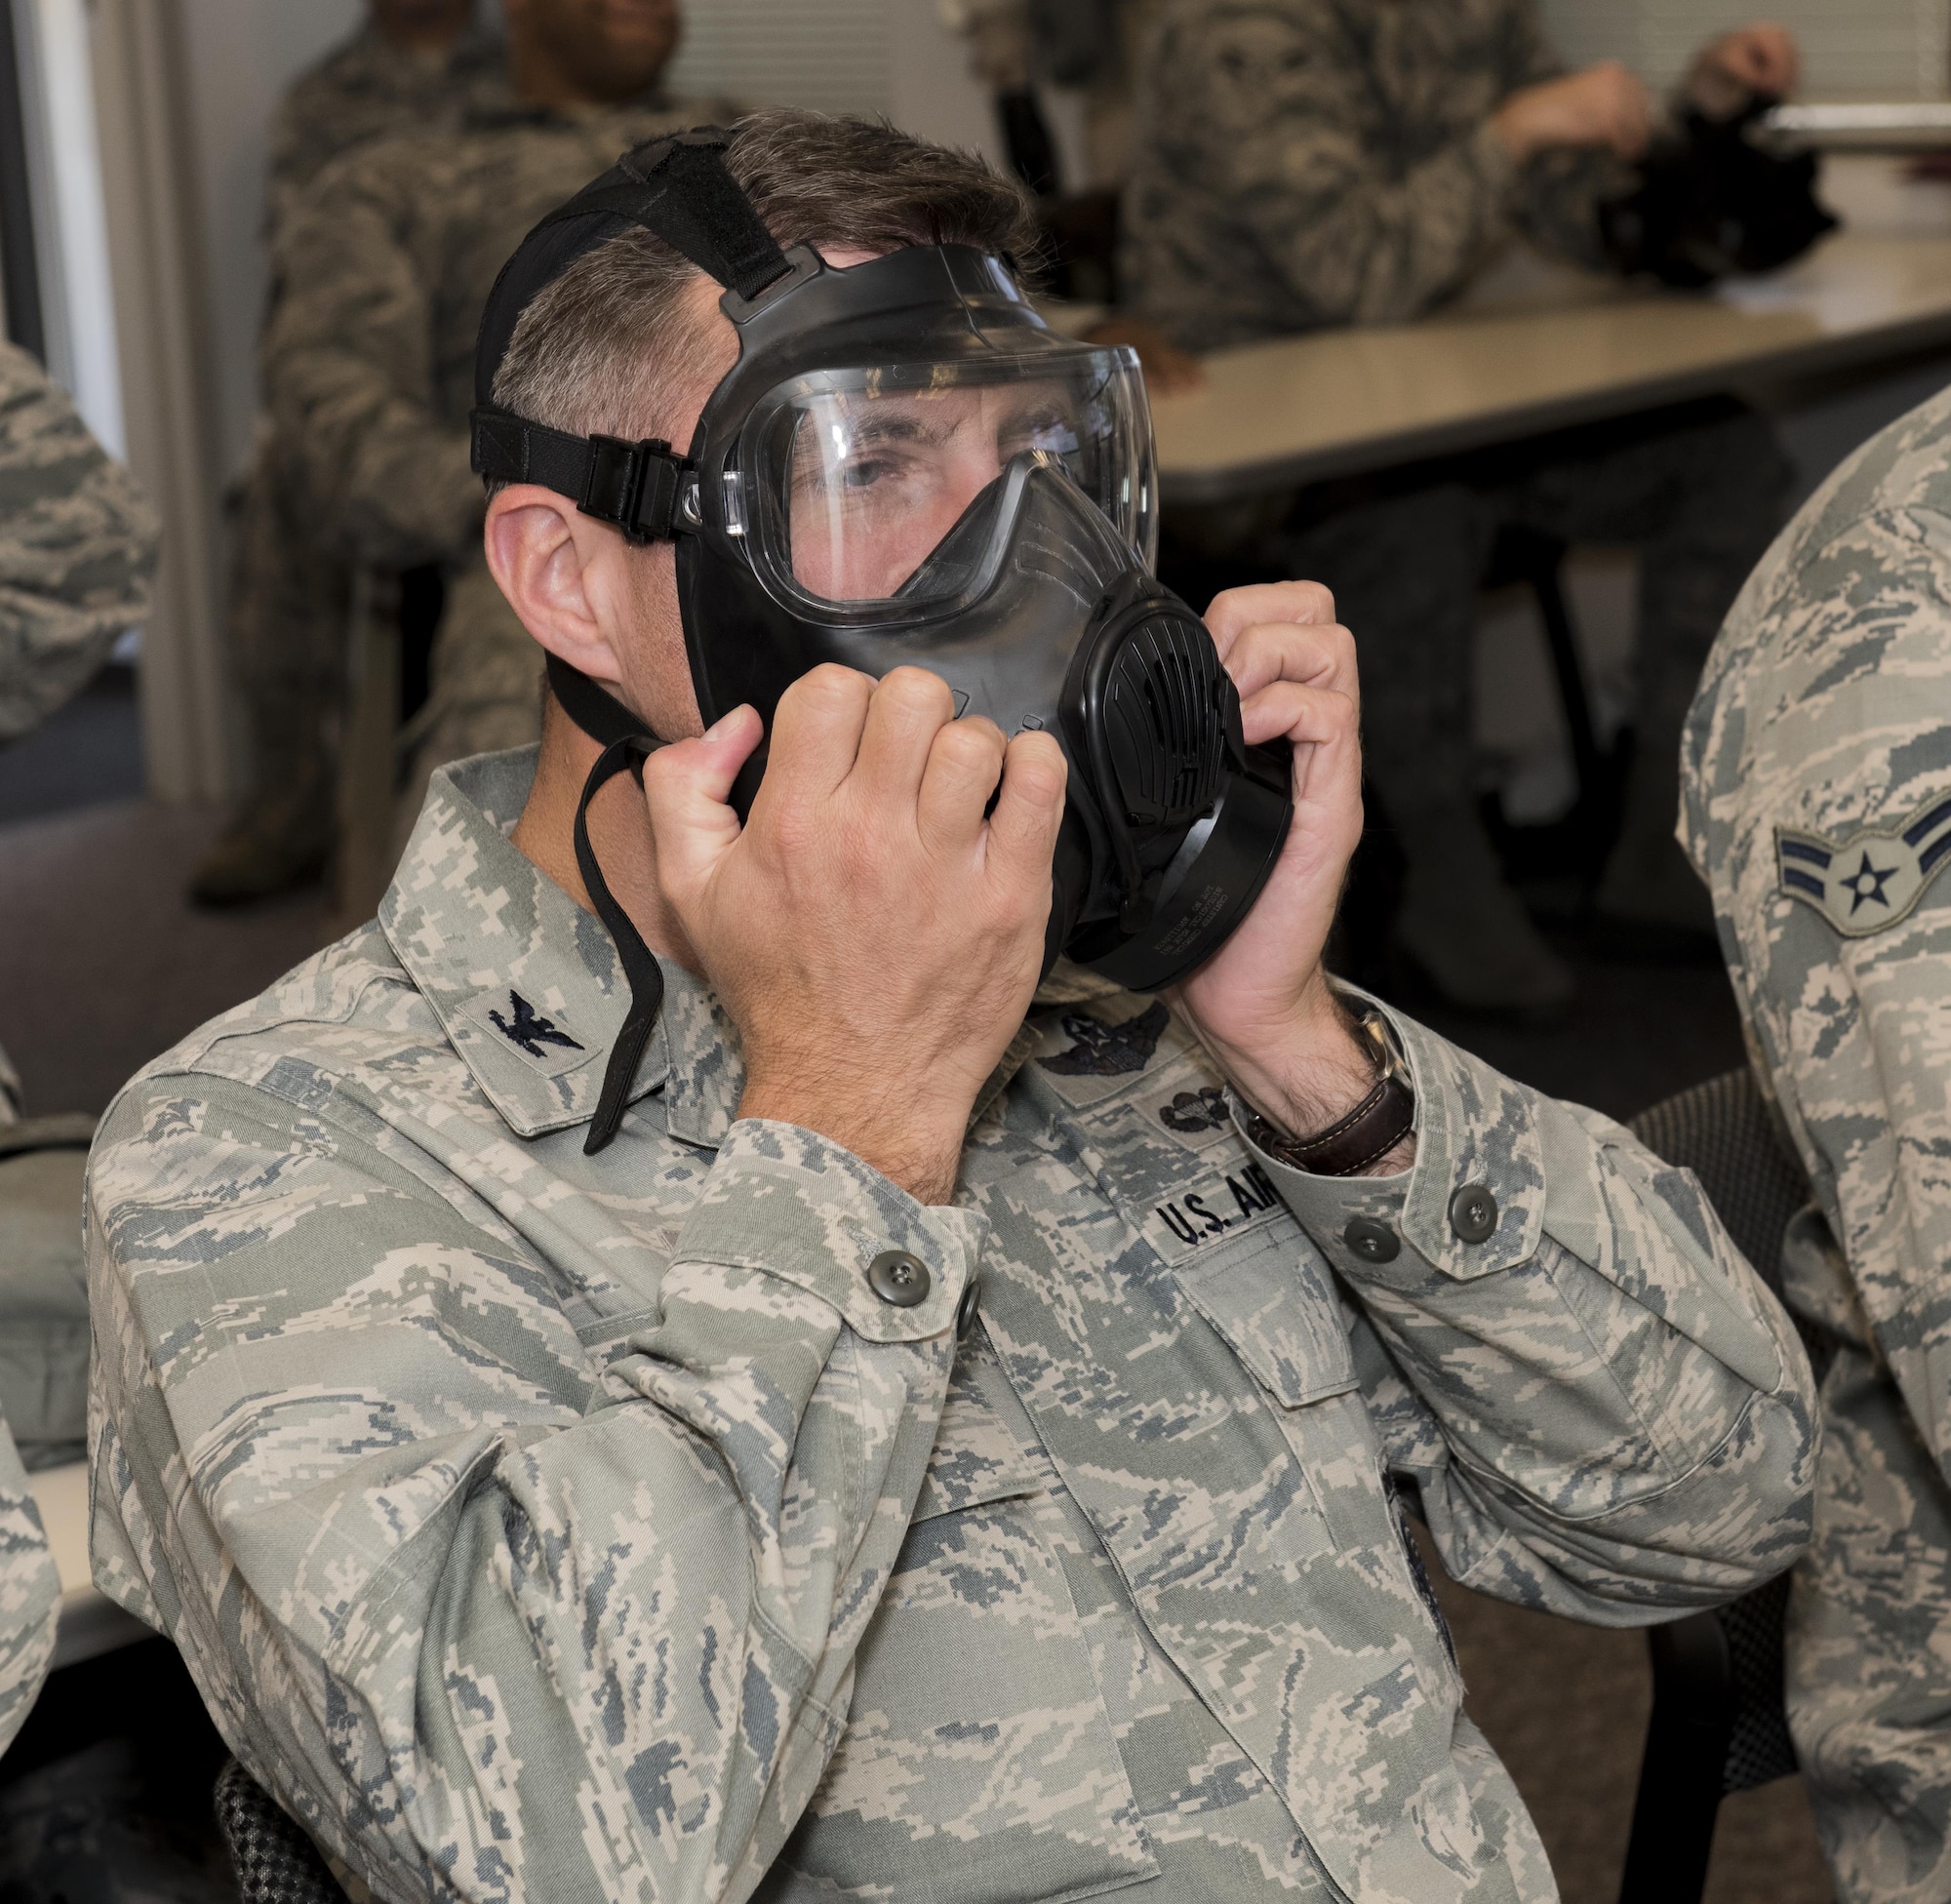 U.S. Air Force Col. John Klein, the commanding officer of the 60th Air Mobility Wing, checks the respirators on his gas mask during a chemical, biological, radiological and nuclear defense survival skills training course on Travis Air Force Base, Calif., Sep. 21, 2017. CBRN defenses are protective measures taken in situations in which chemical, biological, radiological or nuclear warfare (including terrorism) hazards may be present. CBRN defense consists of CBRN passive protection, contamination avoidance and CBRN mitigation. (U.S. Air Force photo by Heide Couch)